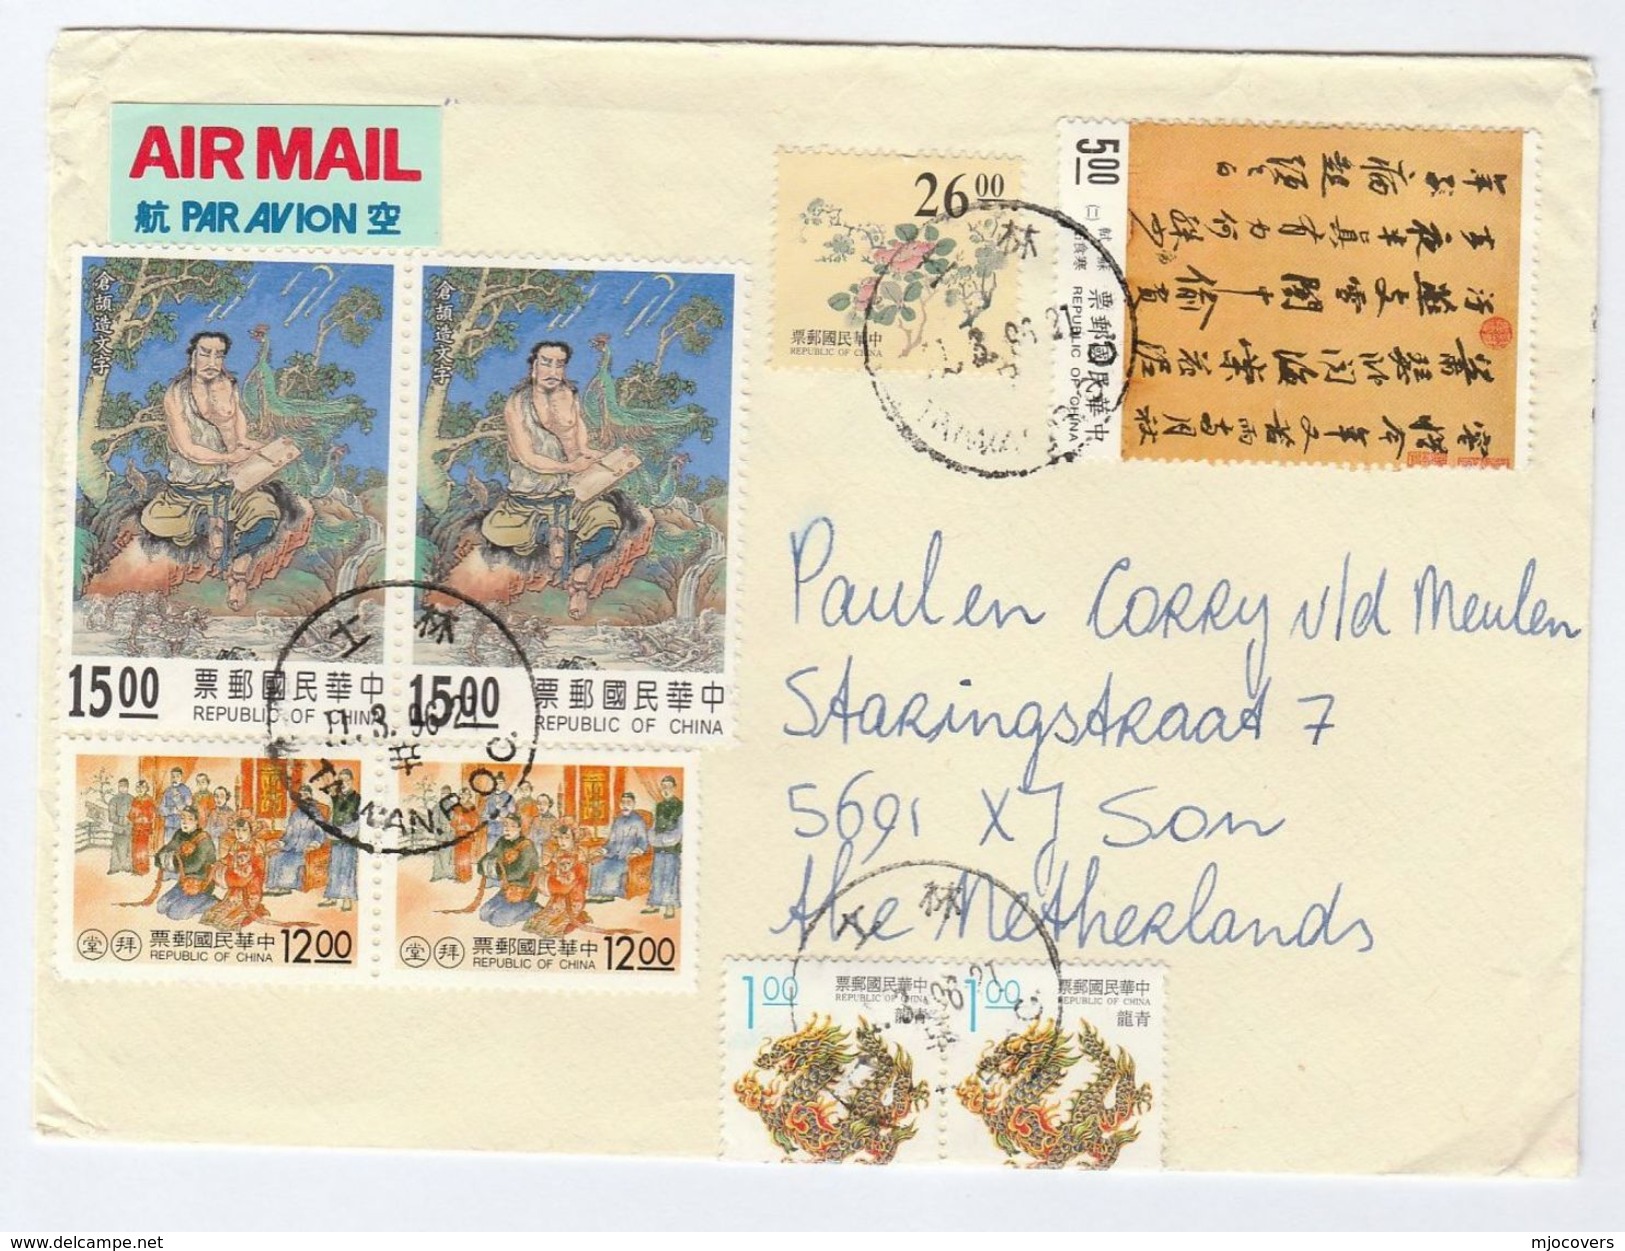 1996 Air Mail TAIWAN COVER Stamps COSTUME, ART, BIRD, Etc To Netherlands Airmail Label China - Brieven En Documenten